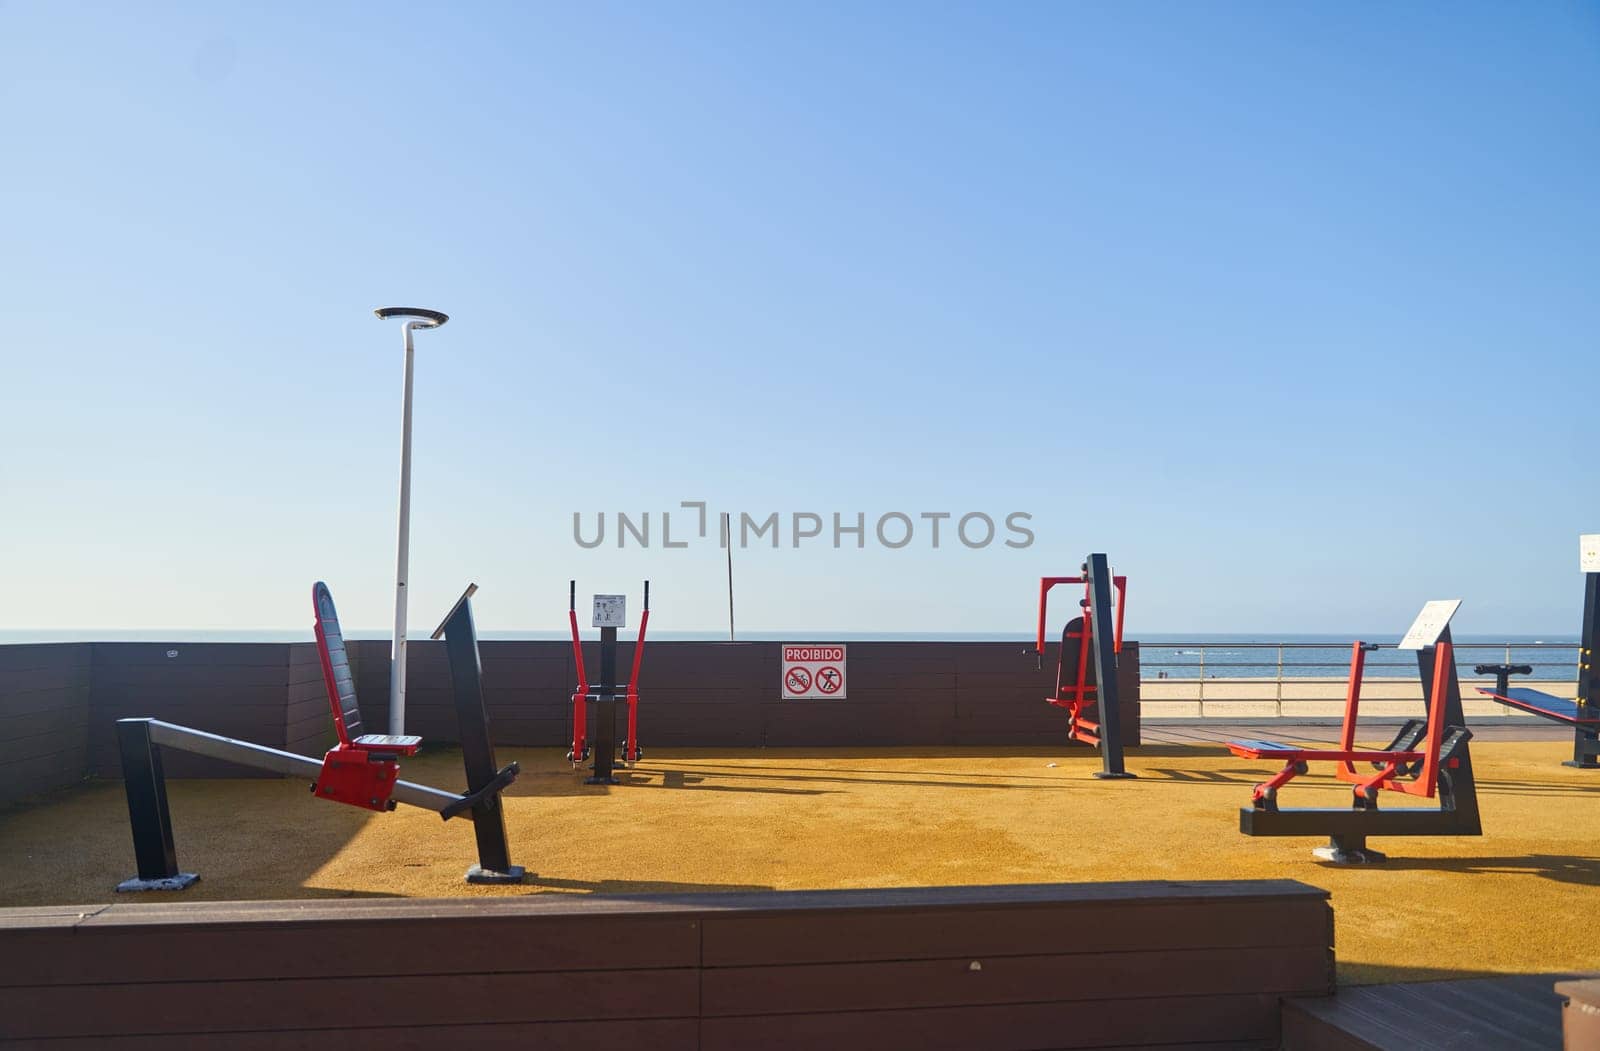 Enjoy an outdoor gym with breathtaking views of the city skyline, horizon, and landscape. Please note that no dogs are allowed in this area